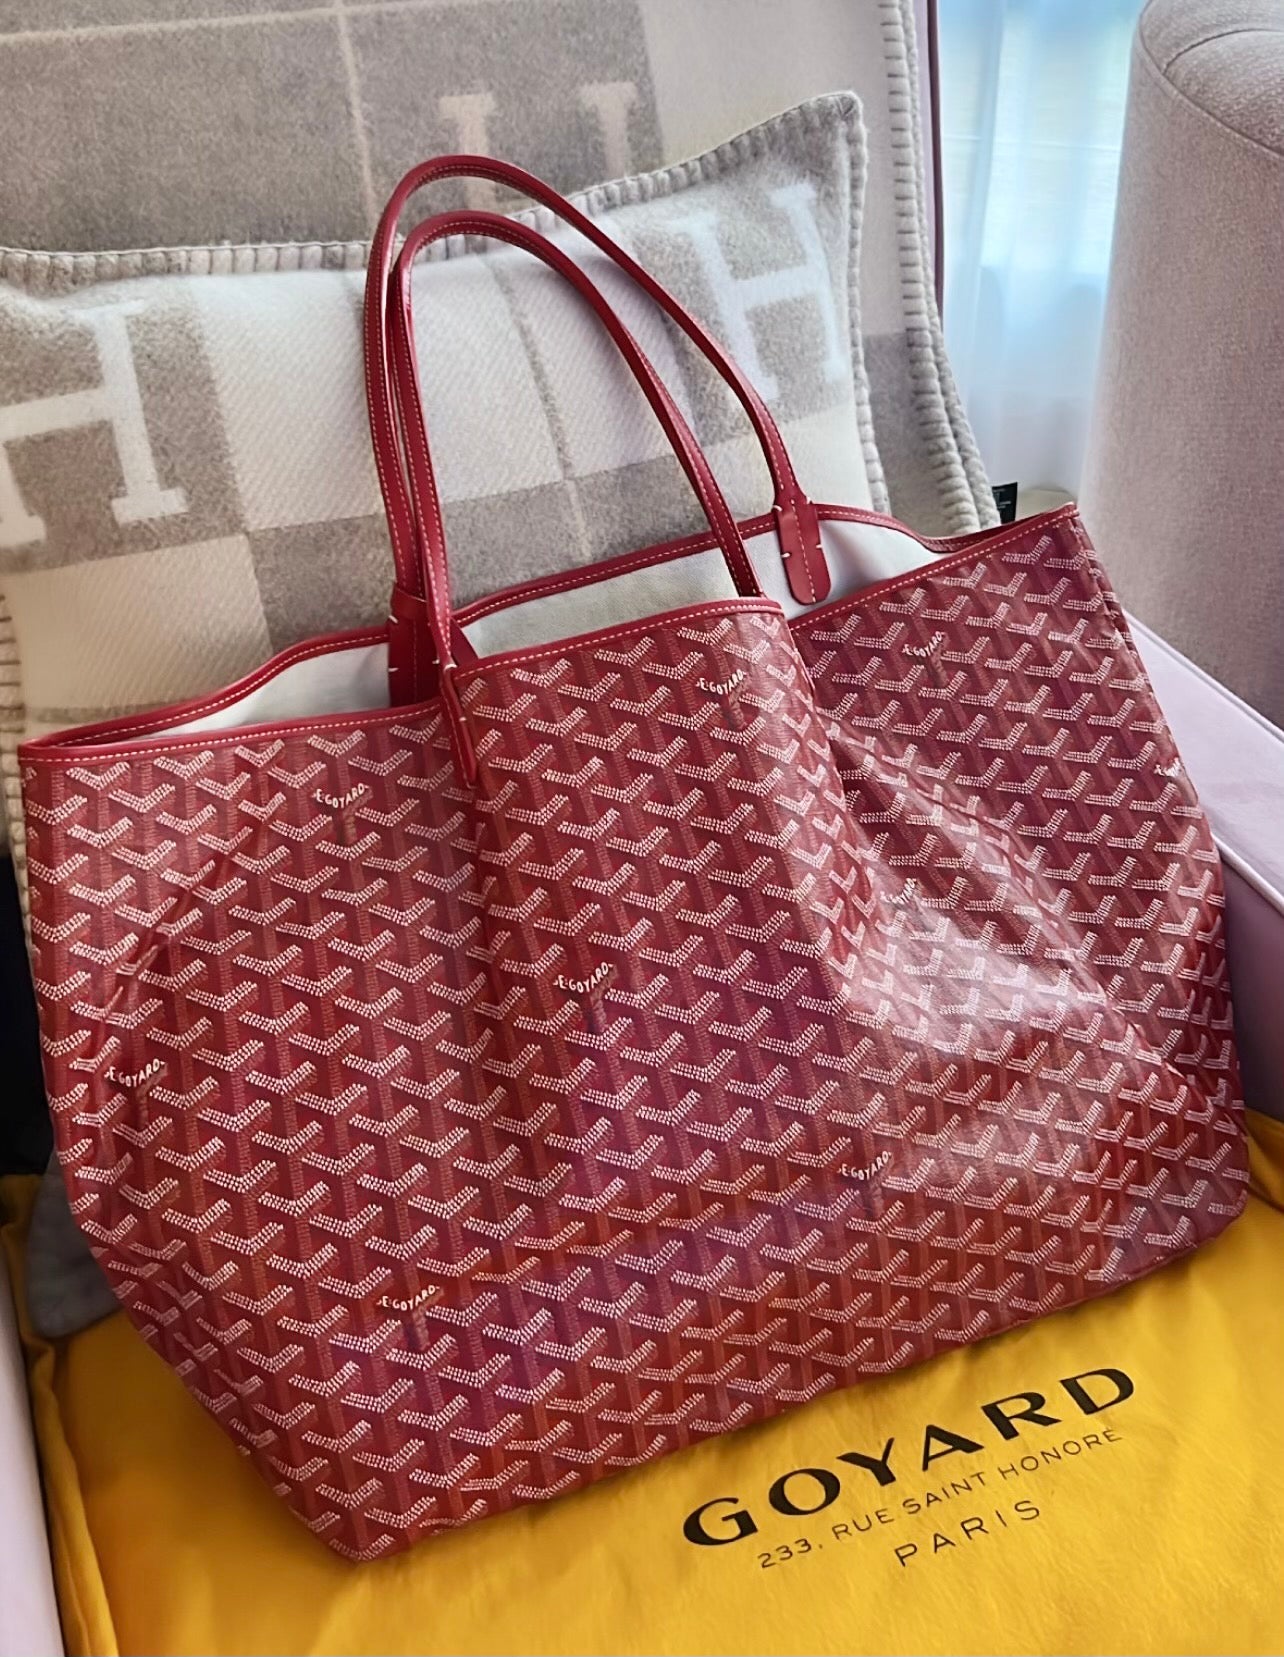 Goyard Red Bags & Handbags for Women, Authenticity Guaranteed